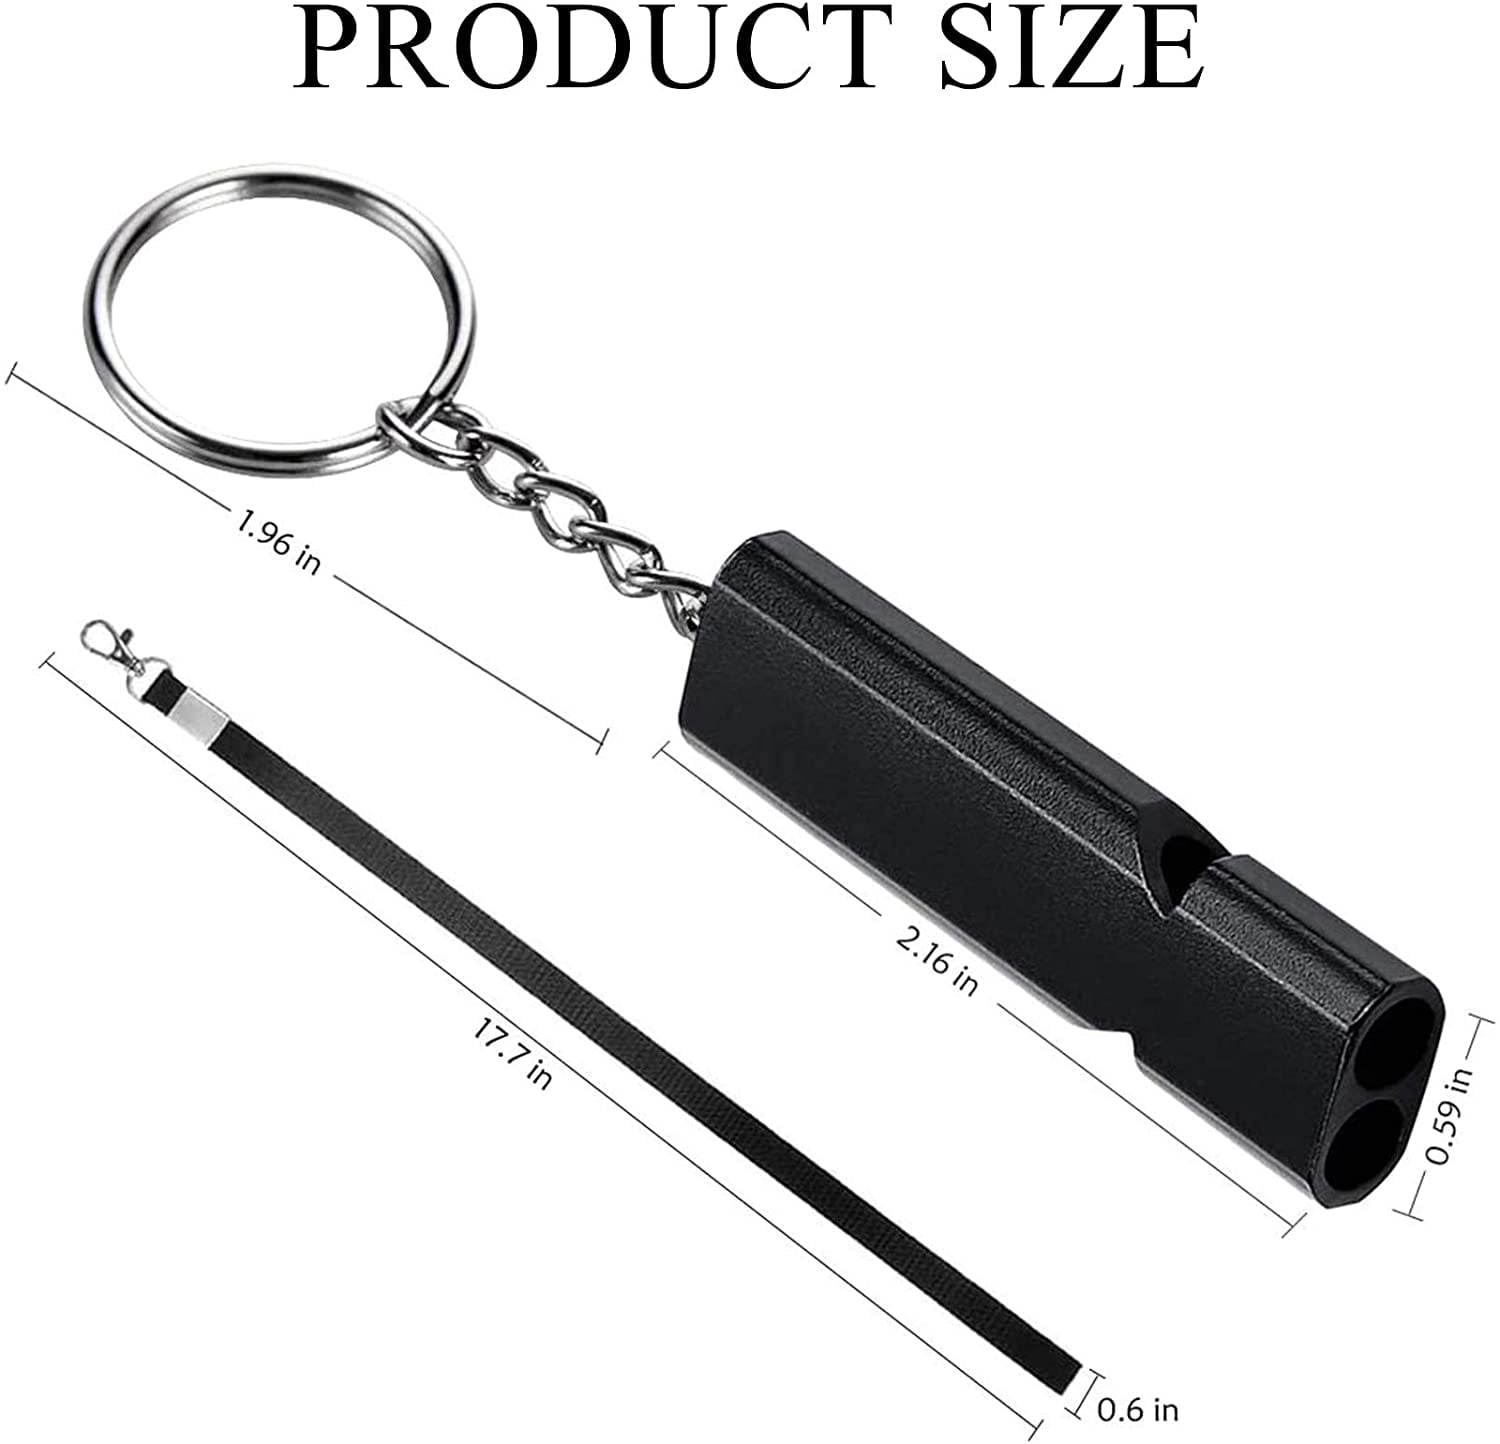 Durable 120db Loud Emergency Survival Whistle Camping Hiking Keychain Outdoor 